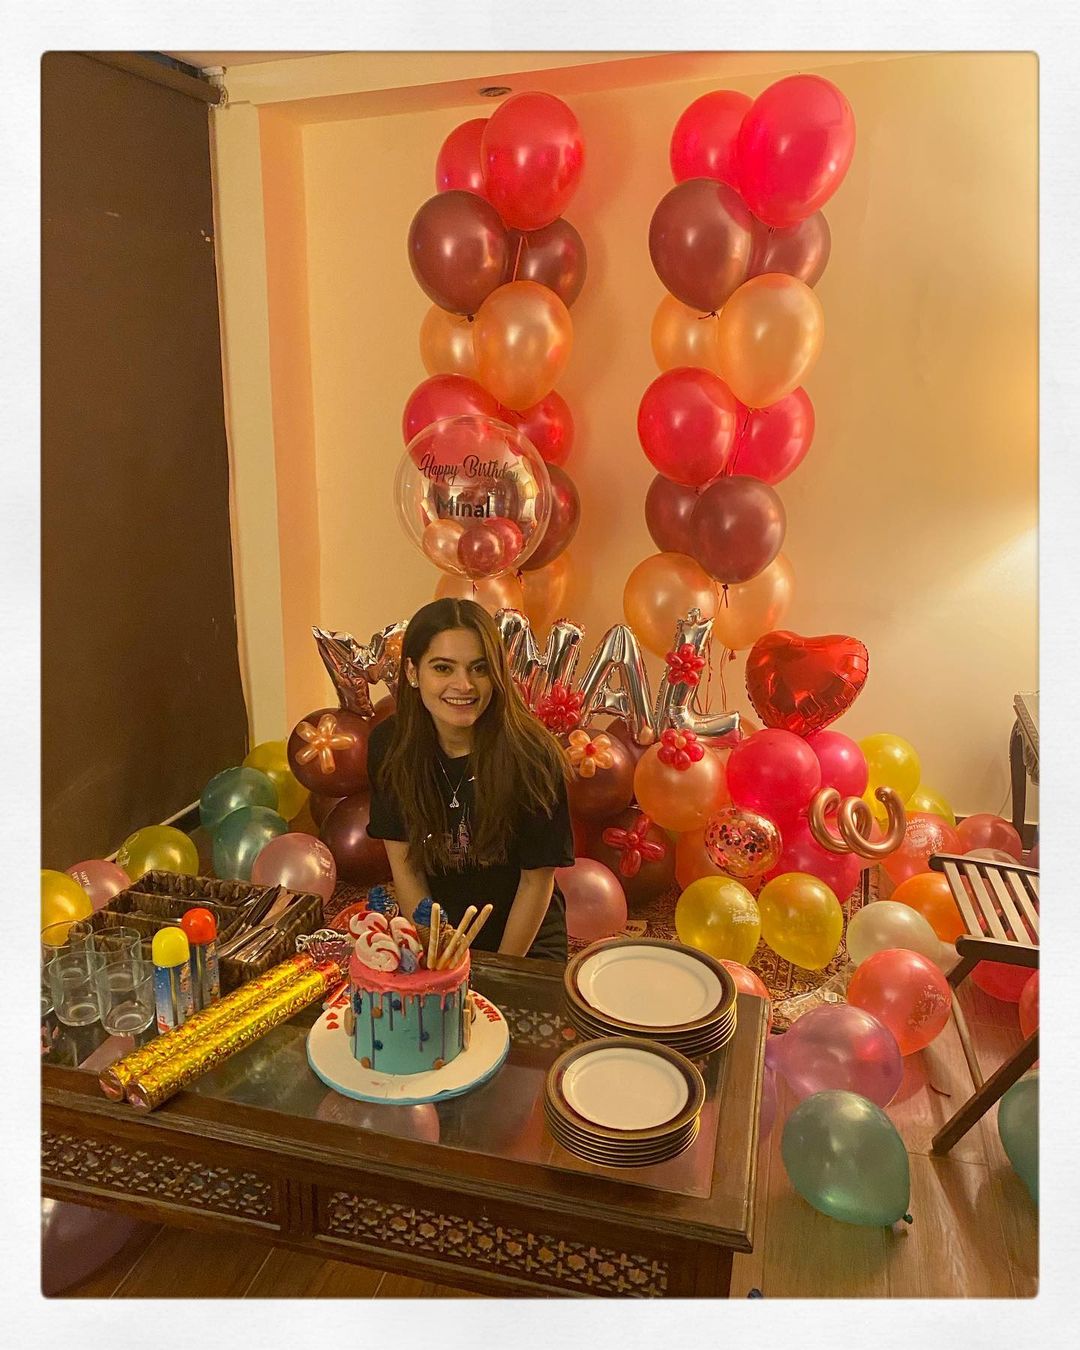 Minal Khan Birthday Pictures with Family and Friends